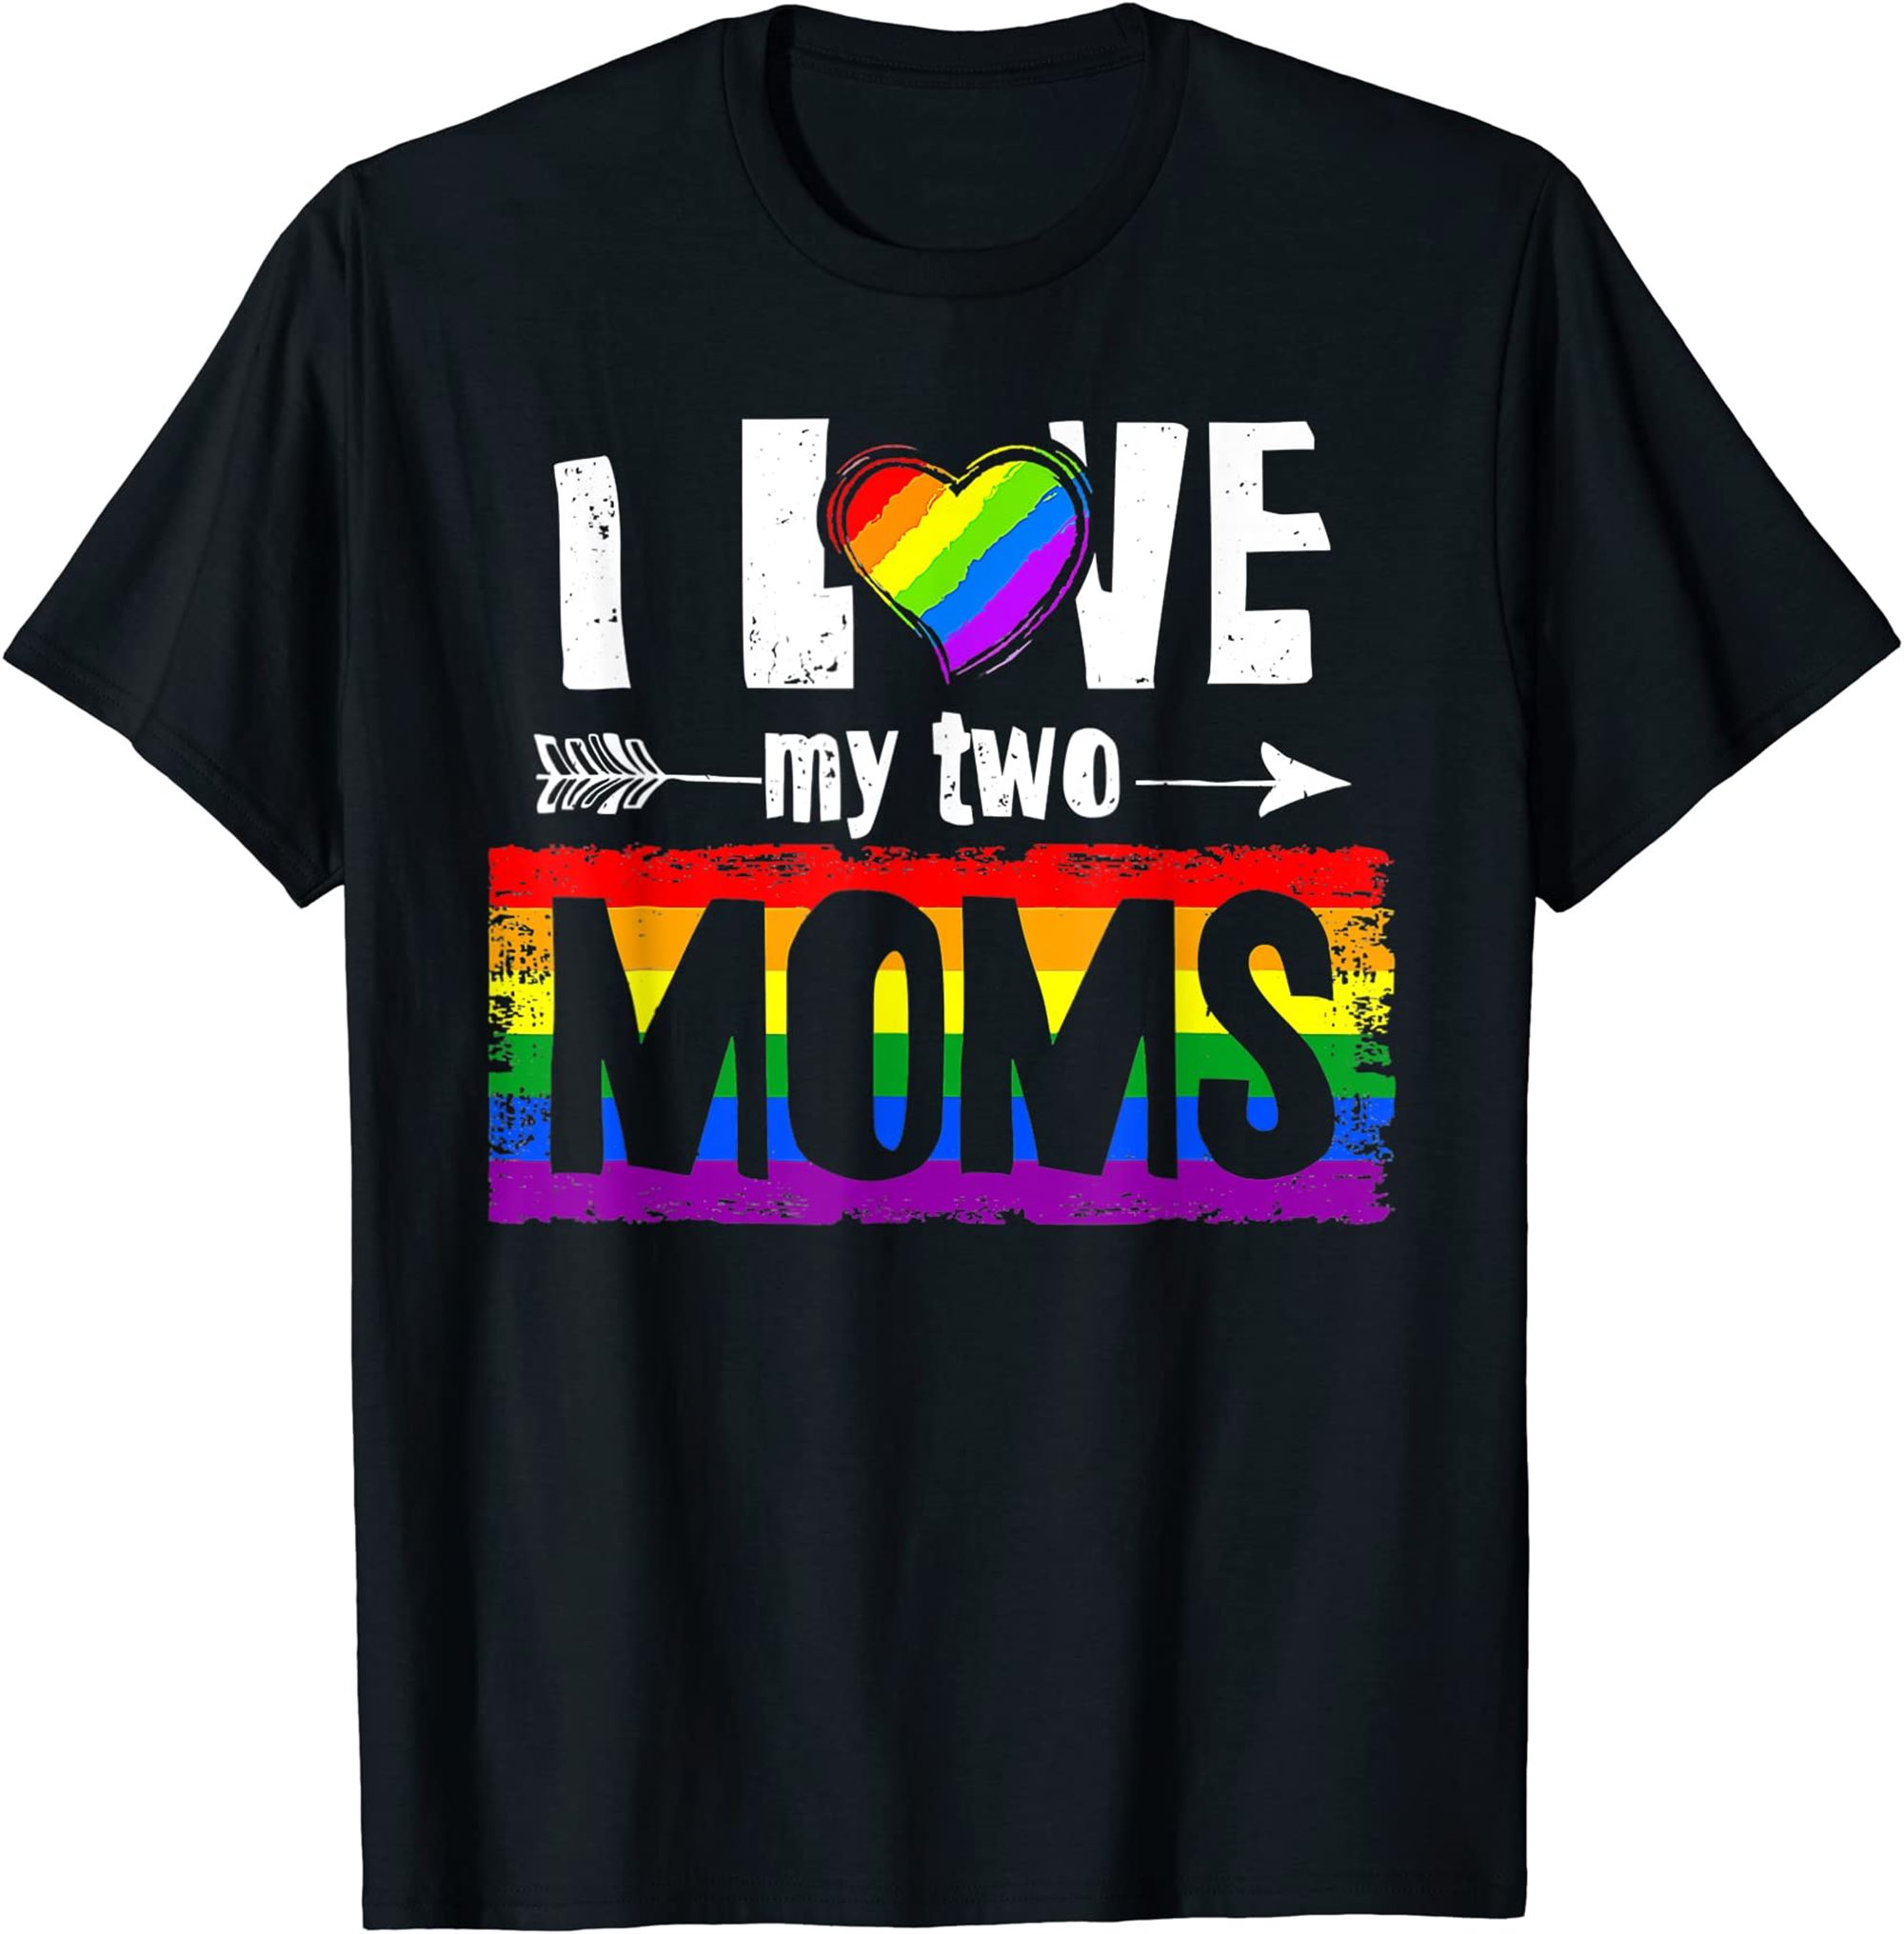 I Love My Two Moms Lesbian Tshirt Lgbt Pride Gifts For Kids T-shirt Plus Size Up To 5xl